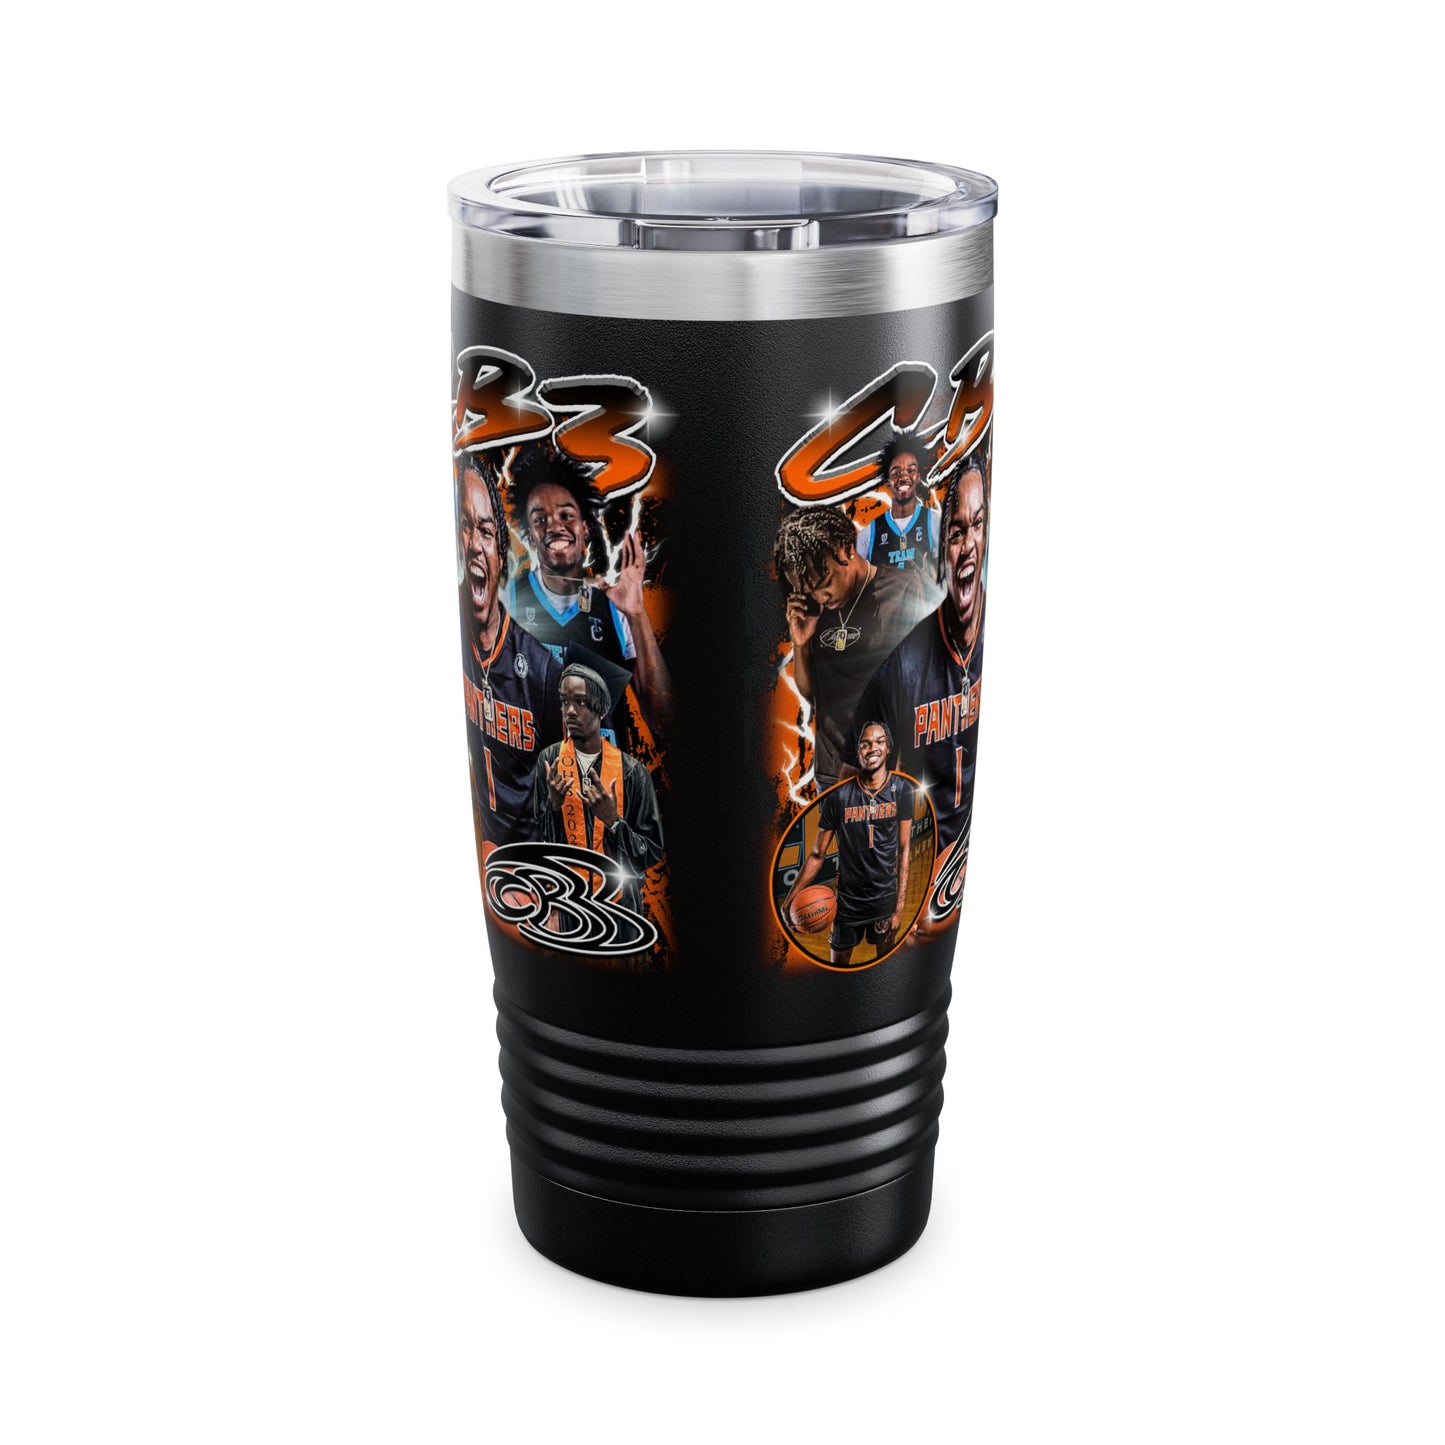 CB3 Stainless Steal Tumbler